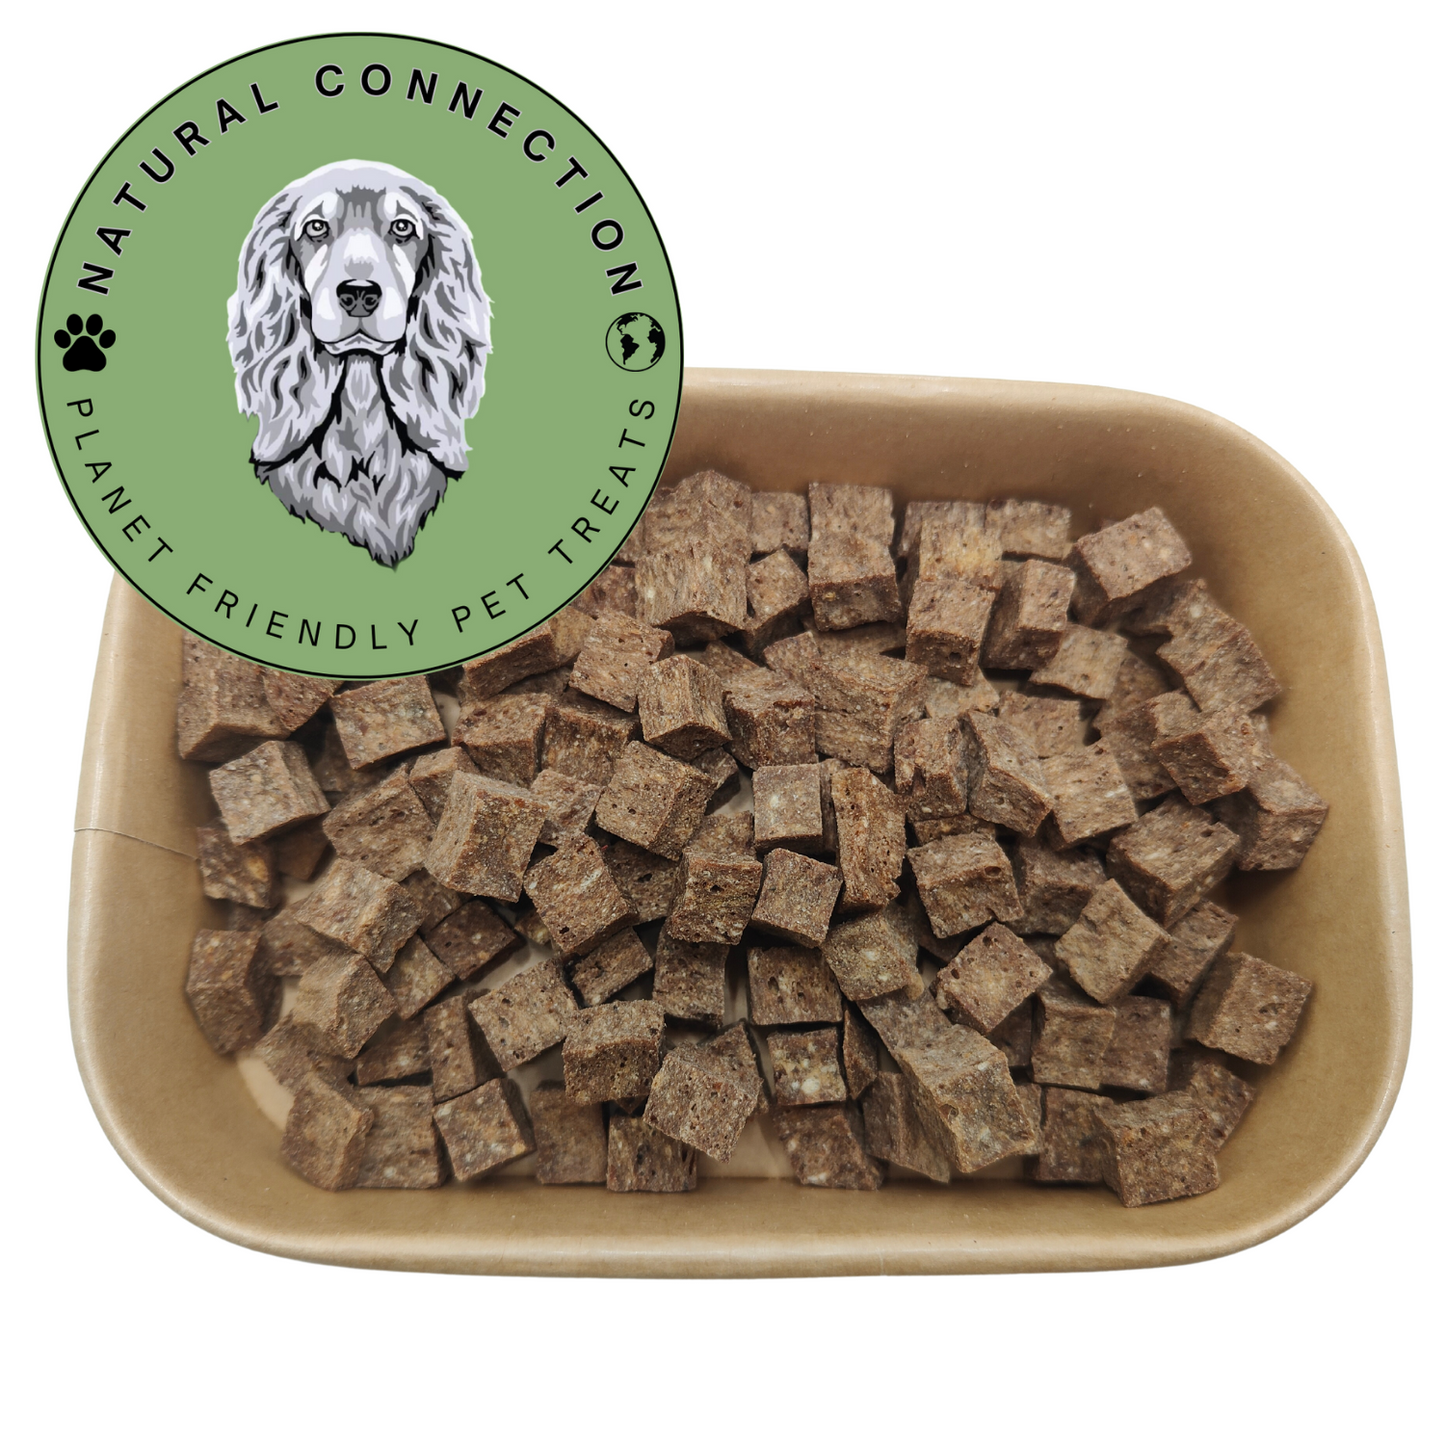 Horse Meat Trainer Bites | Bitesize Crunchy Meaty Dog Treats by Natural Connection